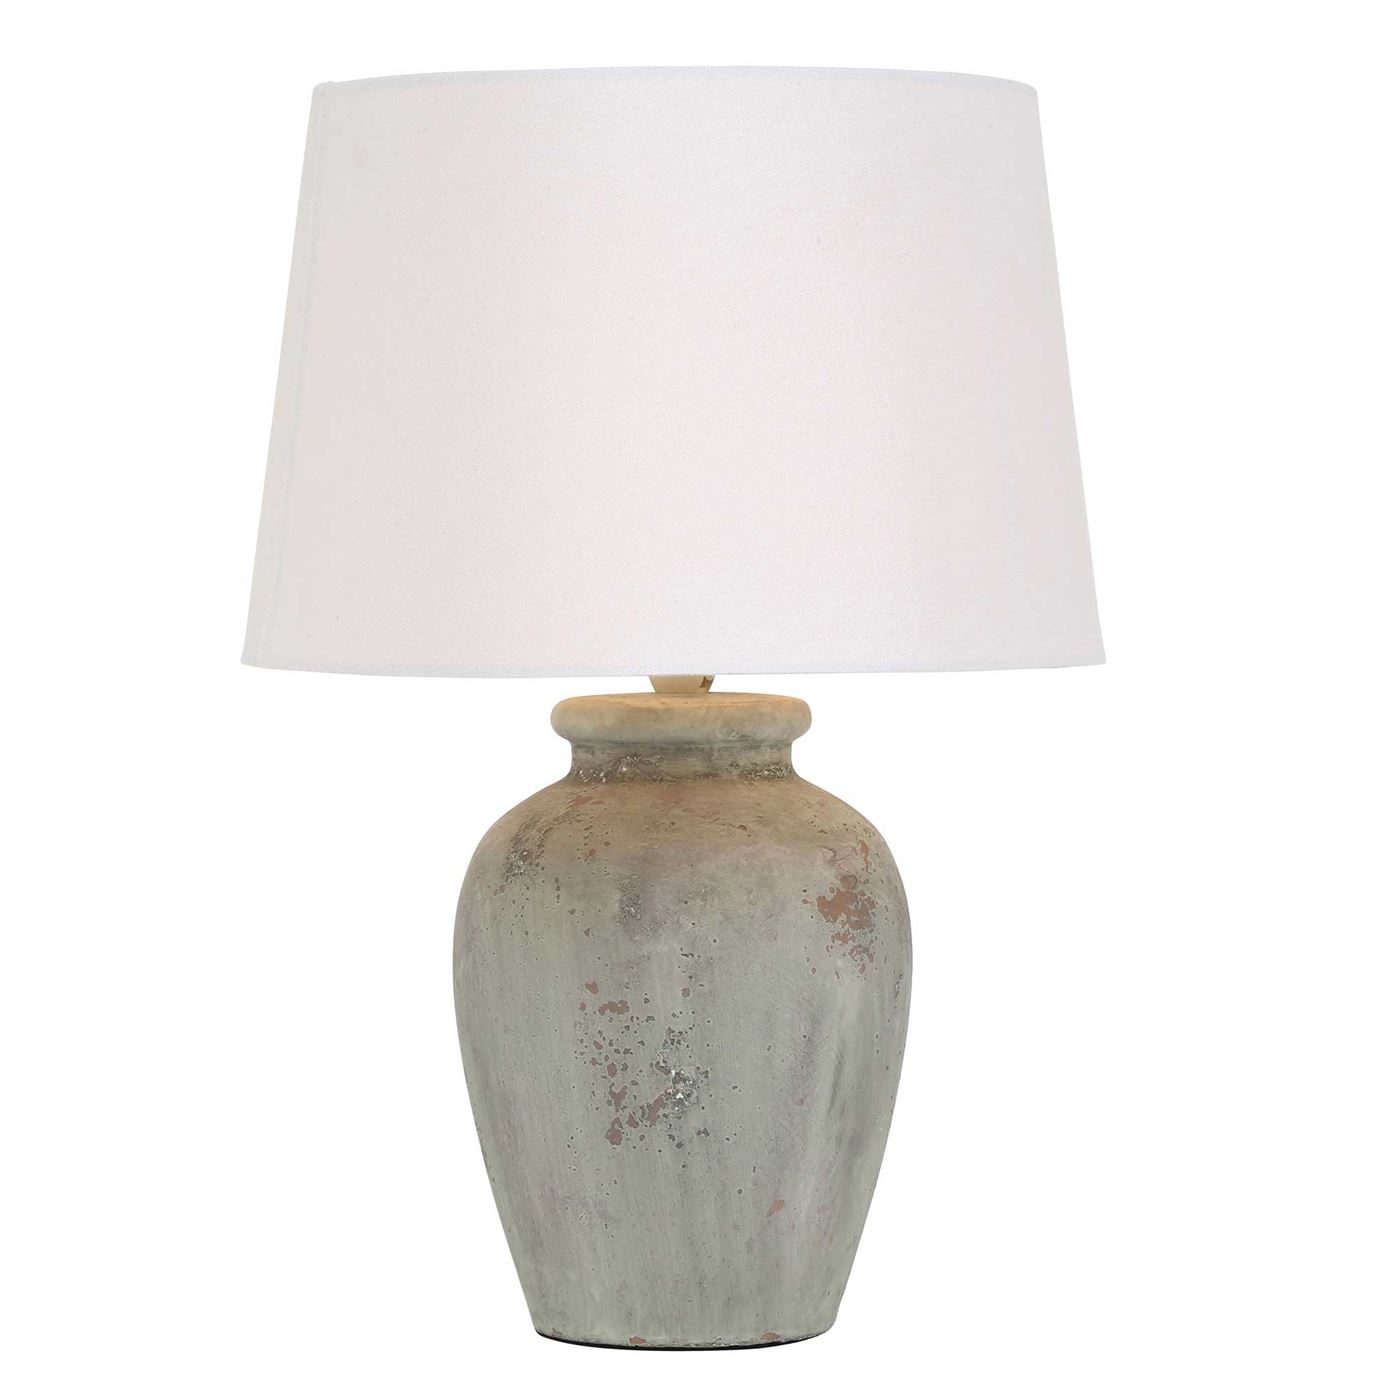 Distressed Table Lamp, Neutral | Barker & Stonehouse